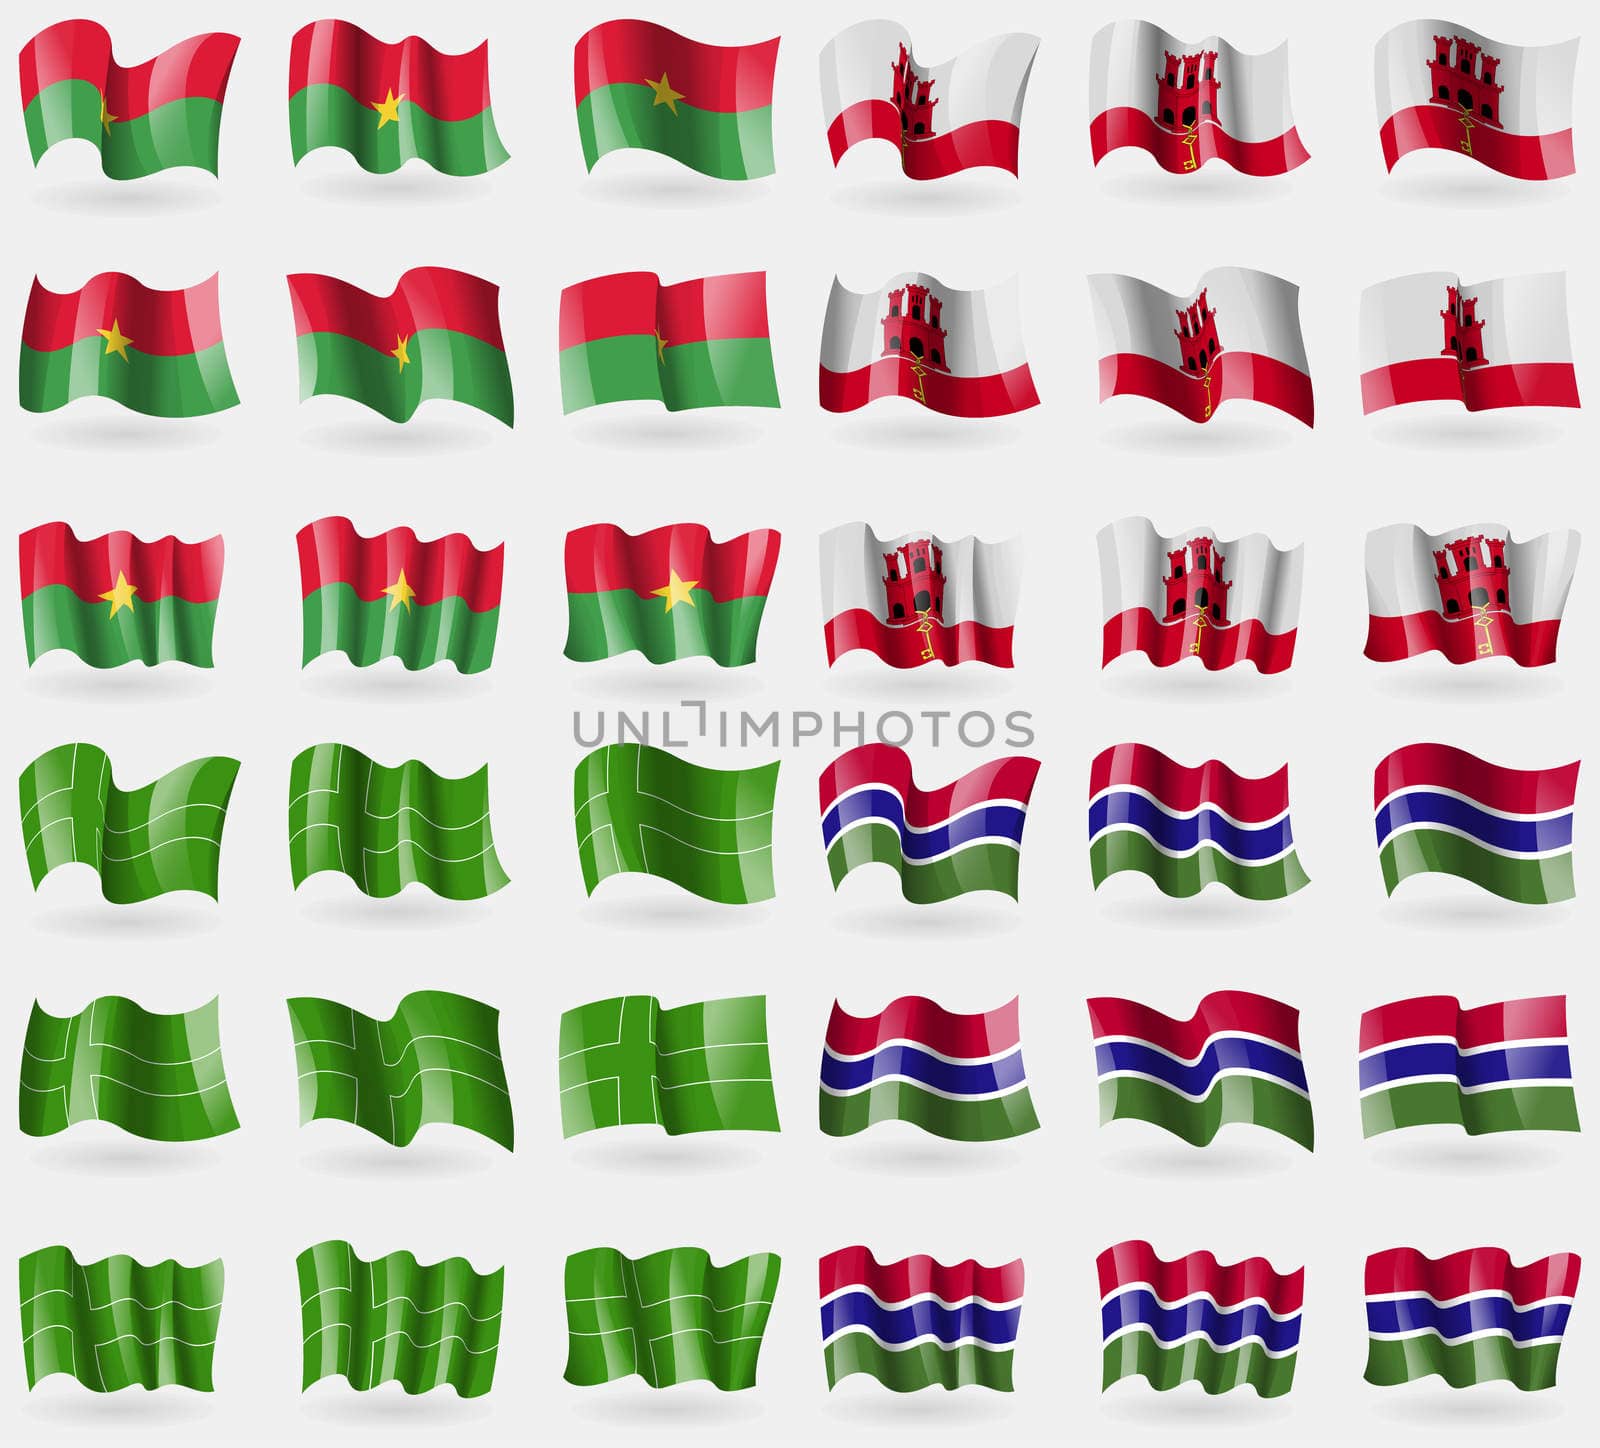 Burkia Faso, Gibraltar, Ladonia, Gambia. Set of 36 flags of the countries of the world. illustration